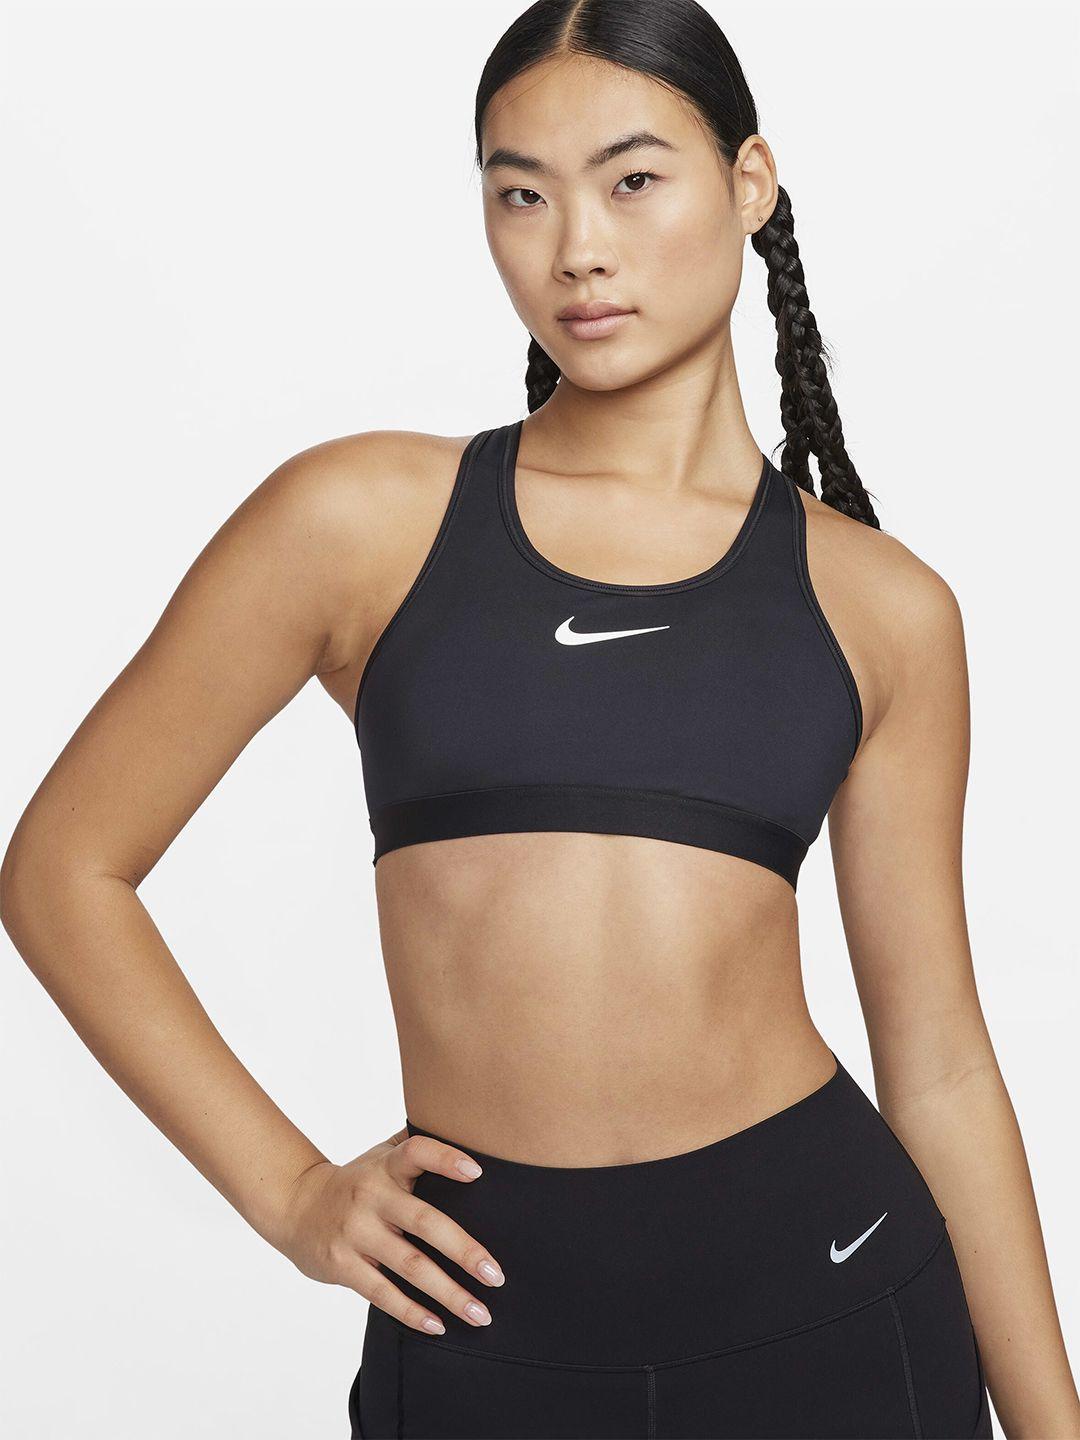 nike-swoosh-high-support-women's-non-padded-adjustable-racerback-sports-workout-bra